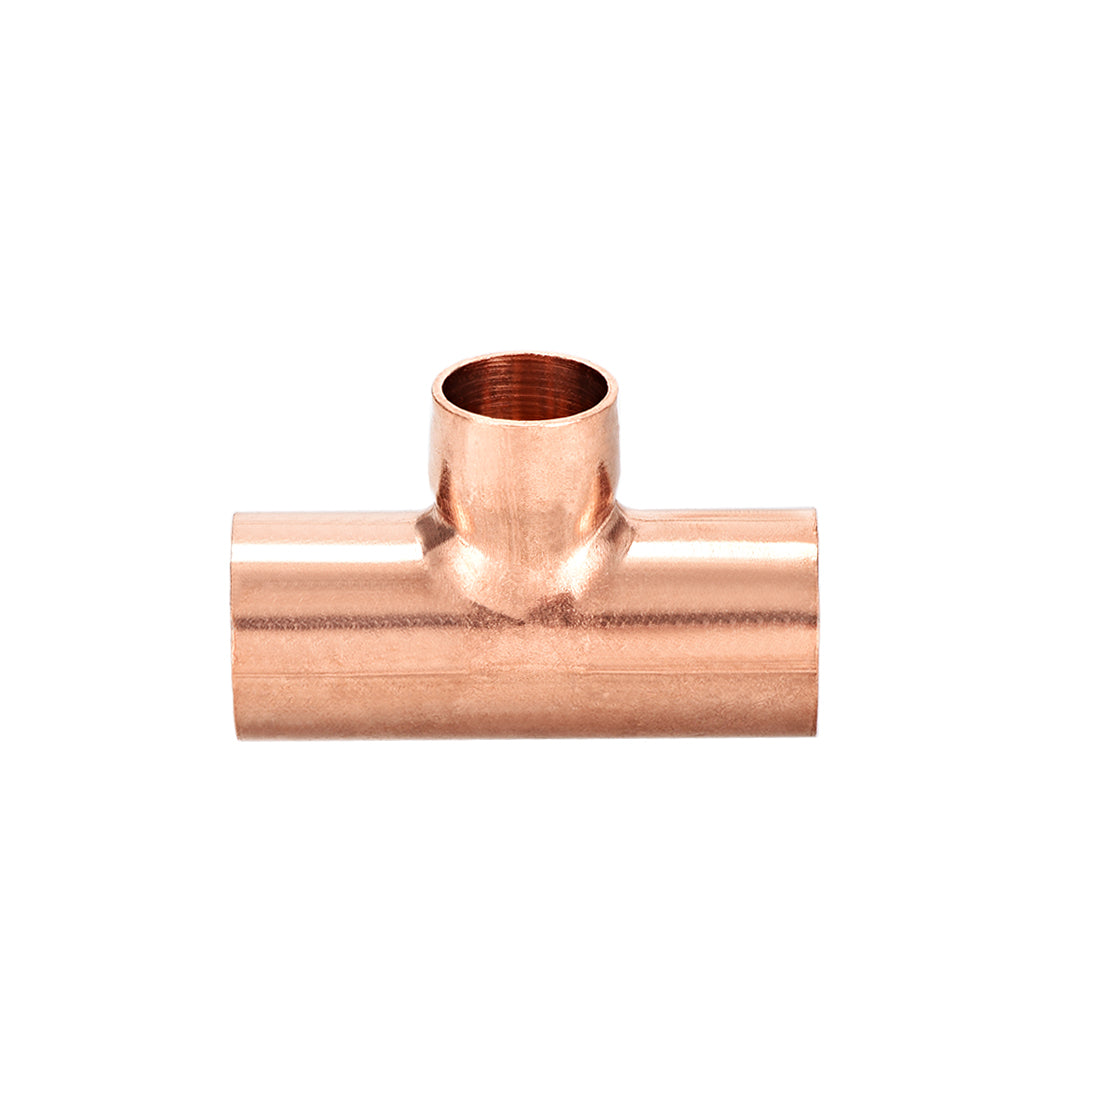 uxcell Uxcell 5/8-inch x 1/2-inch x 5/8-inch Copper Reducing Tee Copper Pressure Pipe Fitting Conector  for Plumbing Supply and Refrigeration 2pcs